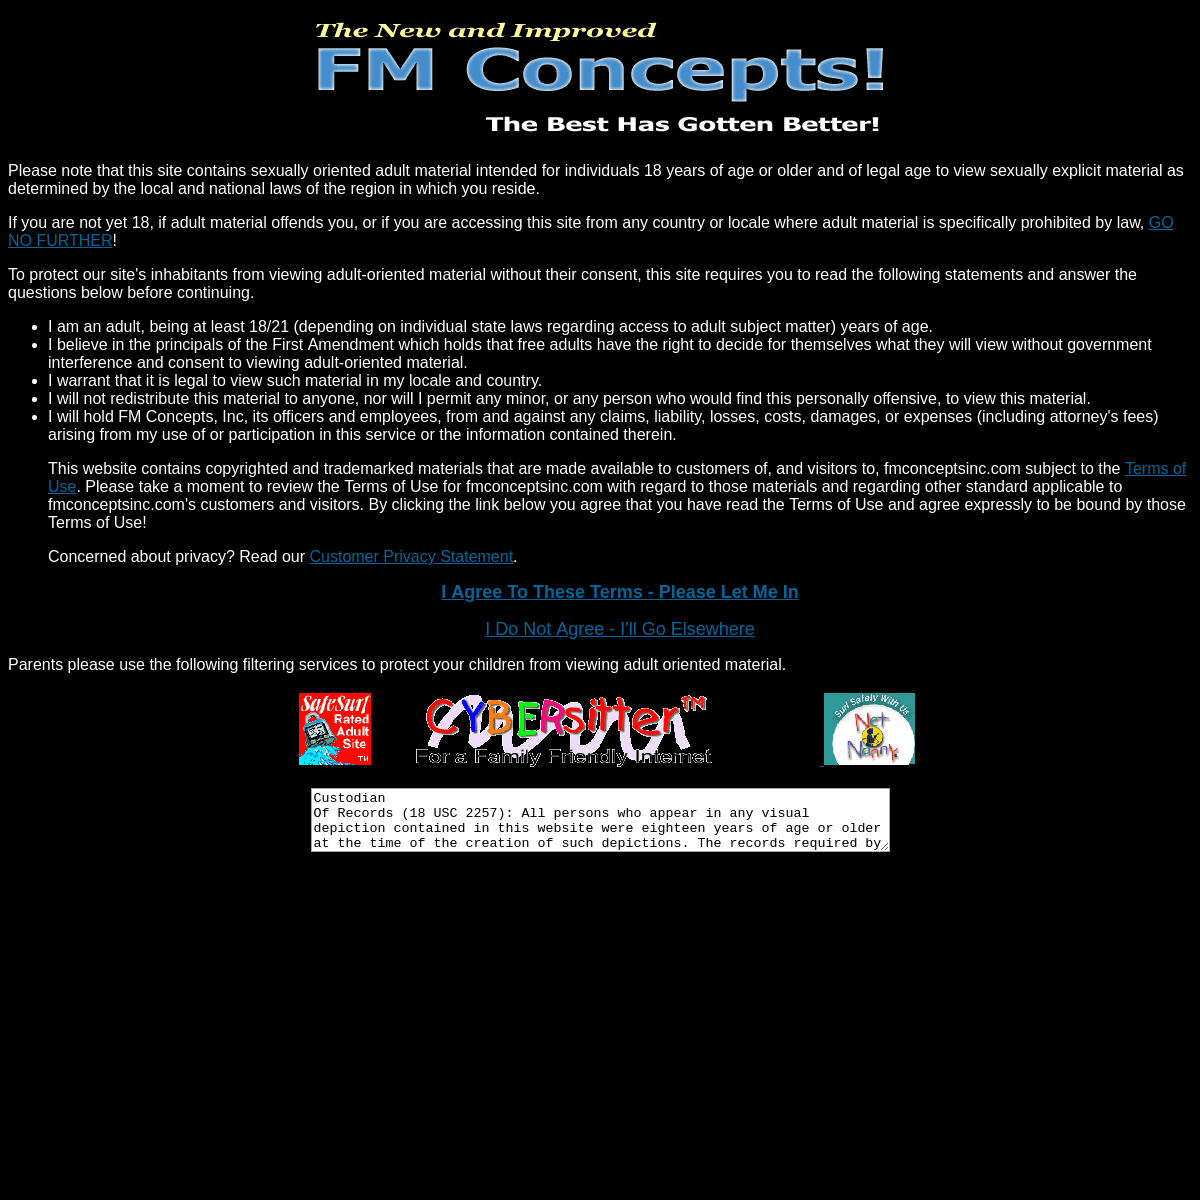 Welcome to The New FM Concepts Foot Site